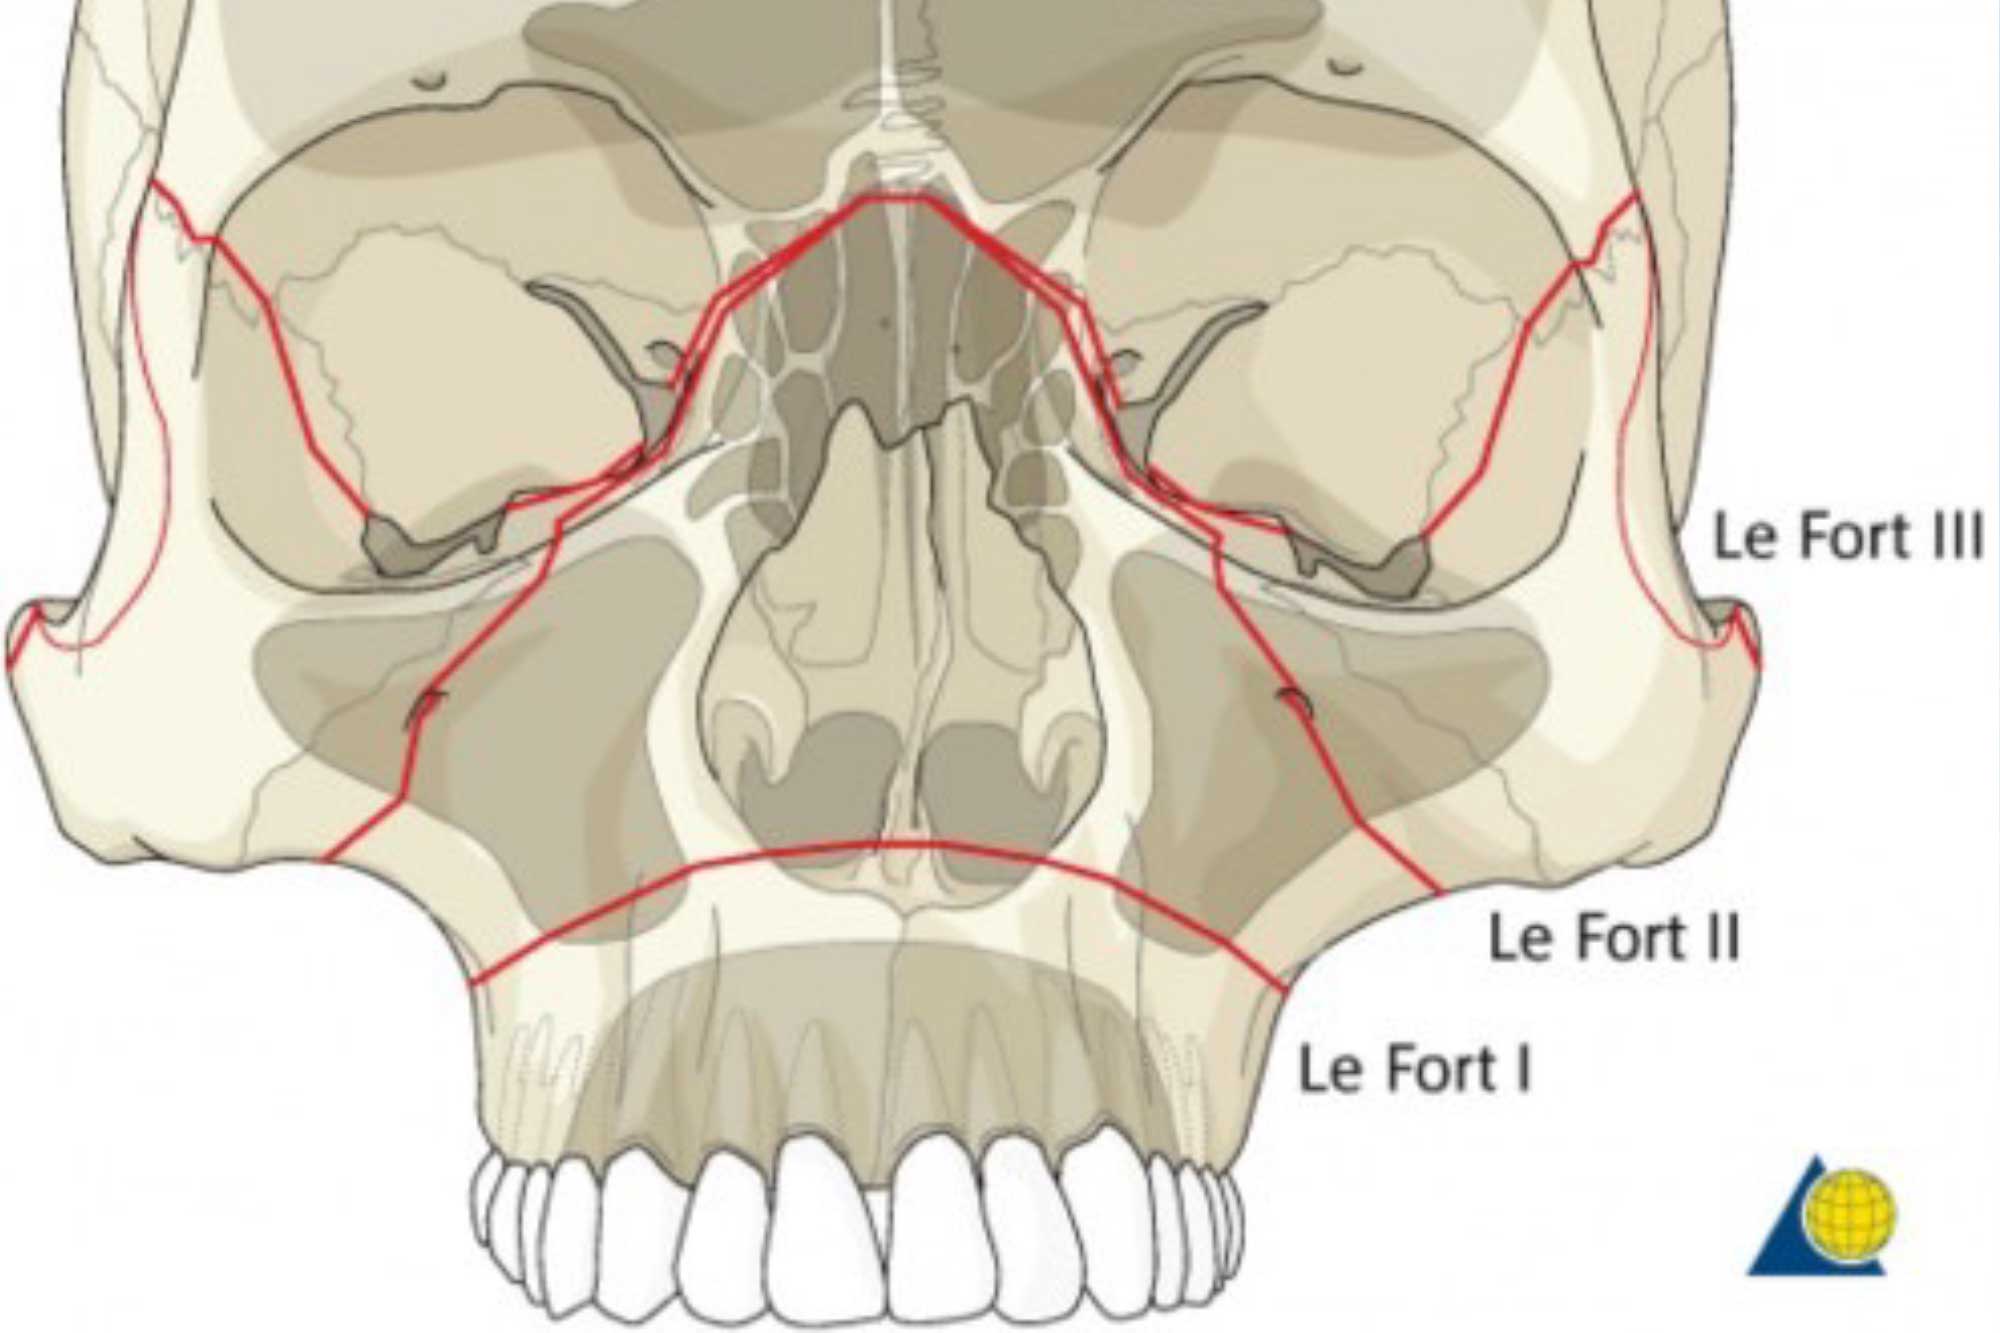 This month, Hannah Hook explores Le Fort fractures, including classifying each one and the best treatment option for the patient.